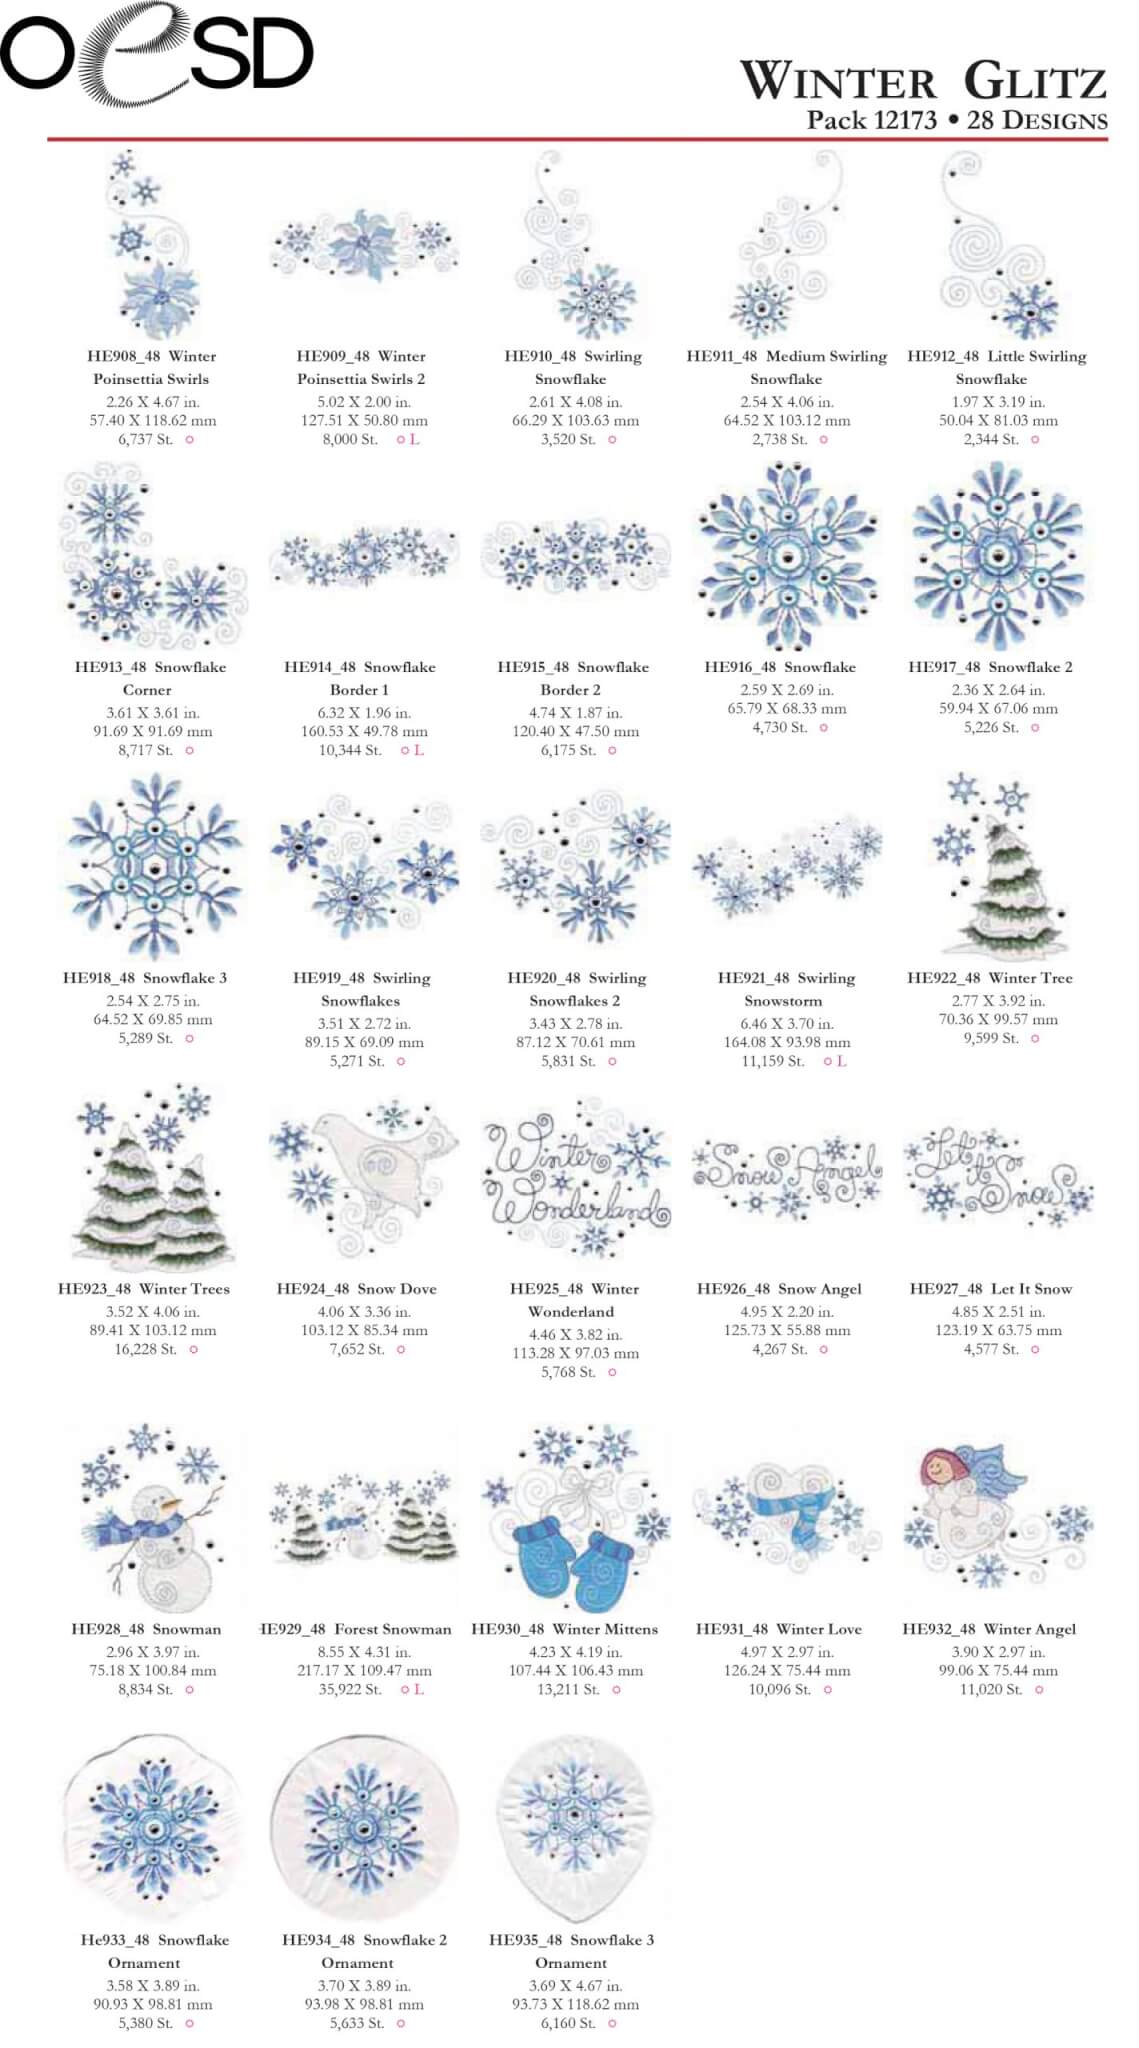 OESD's #12173 Winter Glitz Embroidery Design Collection available at Nancy Zieman Productions at ShopNZP.com